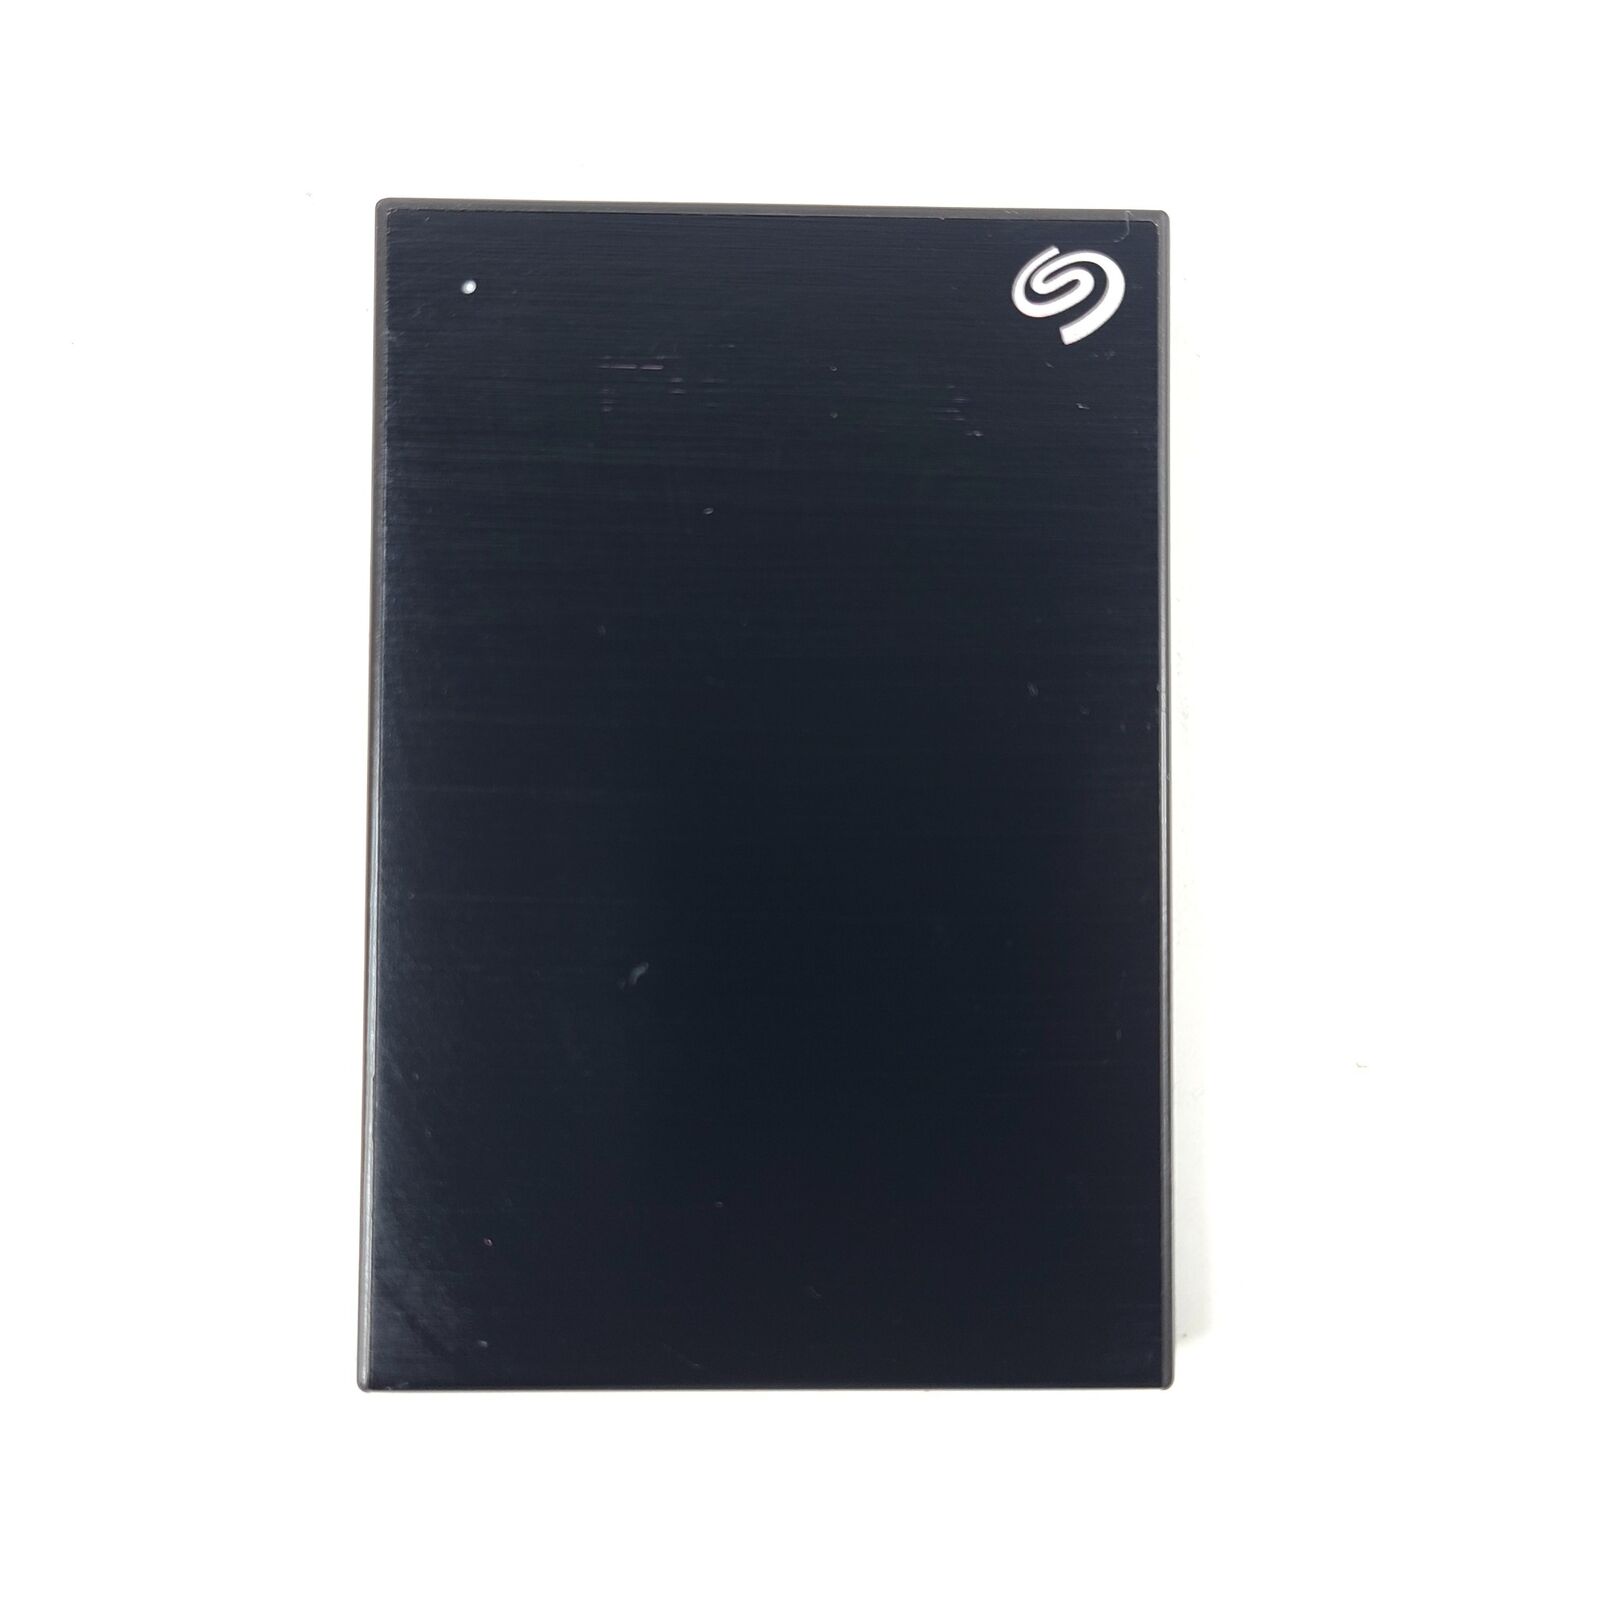 Seagate One Touch SRD0VN2 - 2TB